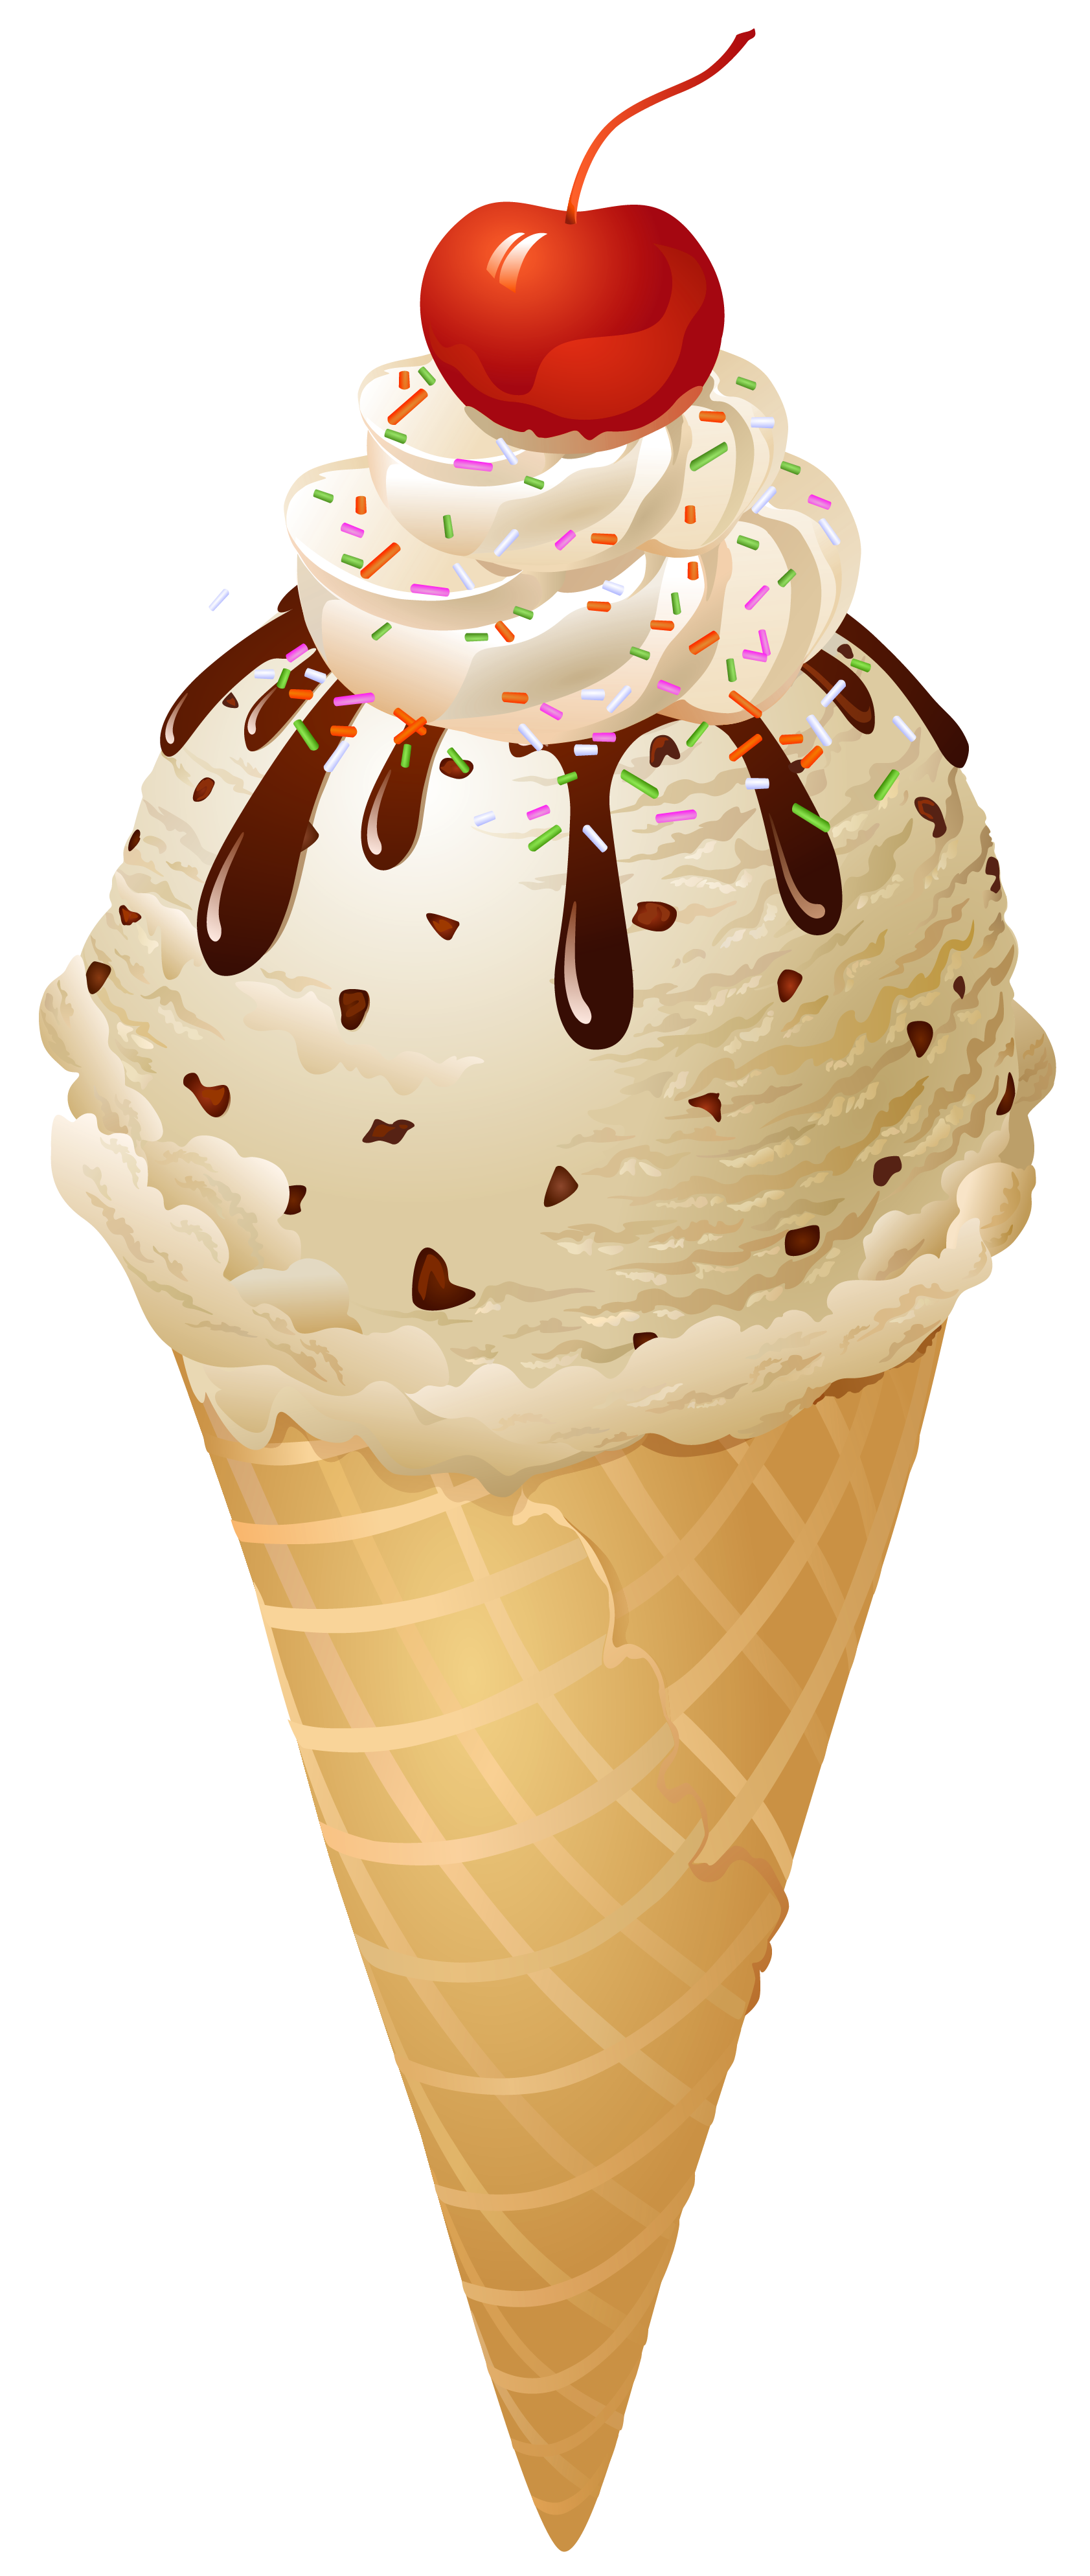 Ice Cream | Free Images at Clker.com - vector clip art online, royalty free & public domain